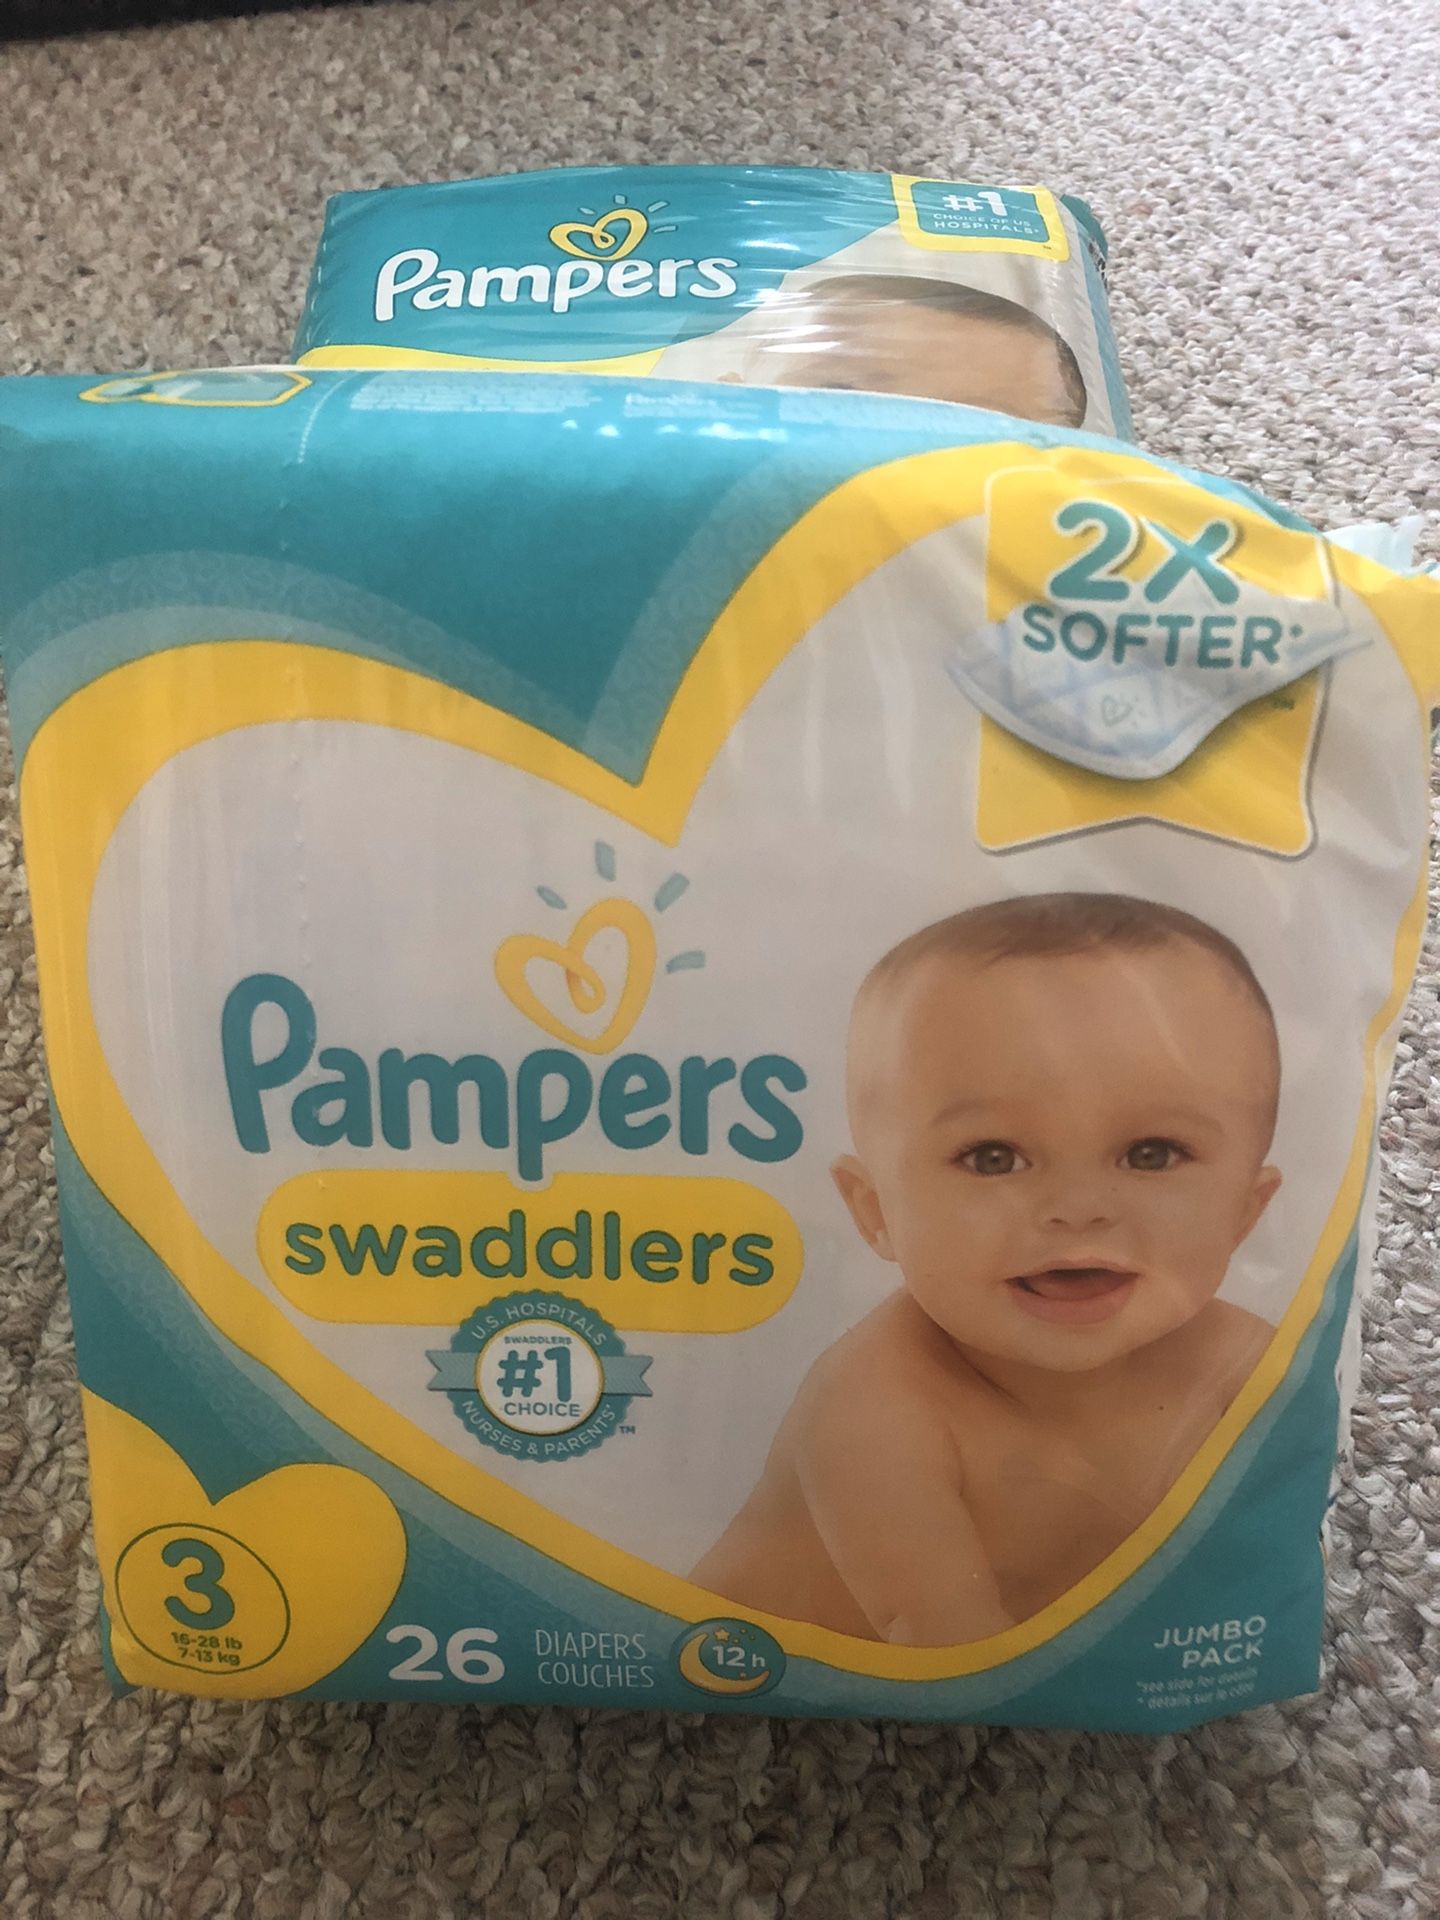 Pampers swaddles size 3 - $7